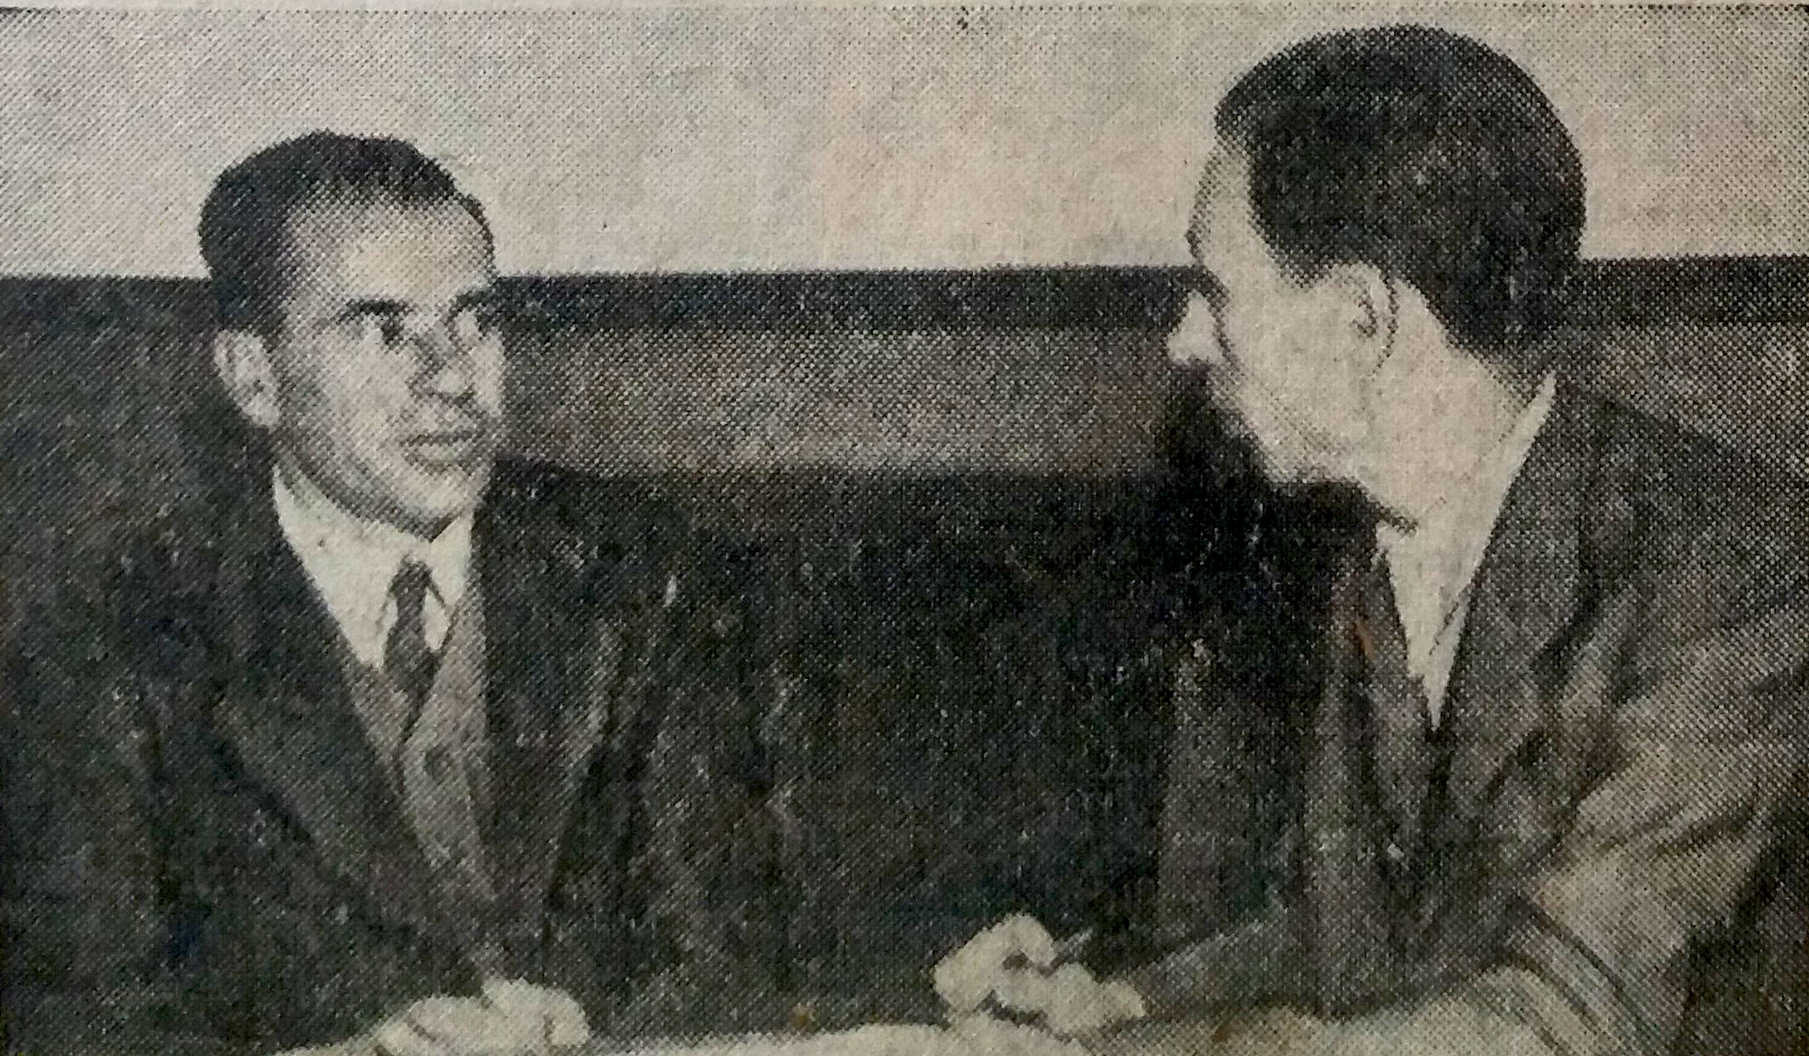  António Amaral giving interviews to the Portuguese press